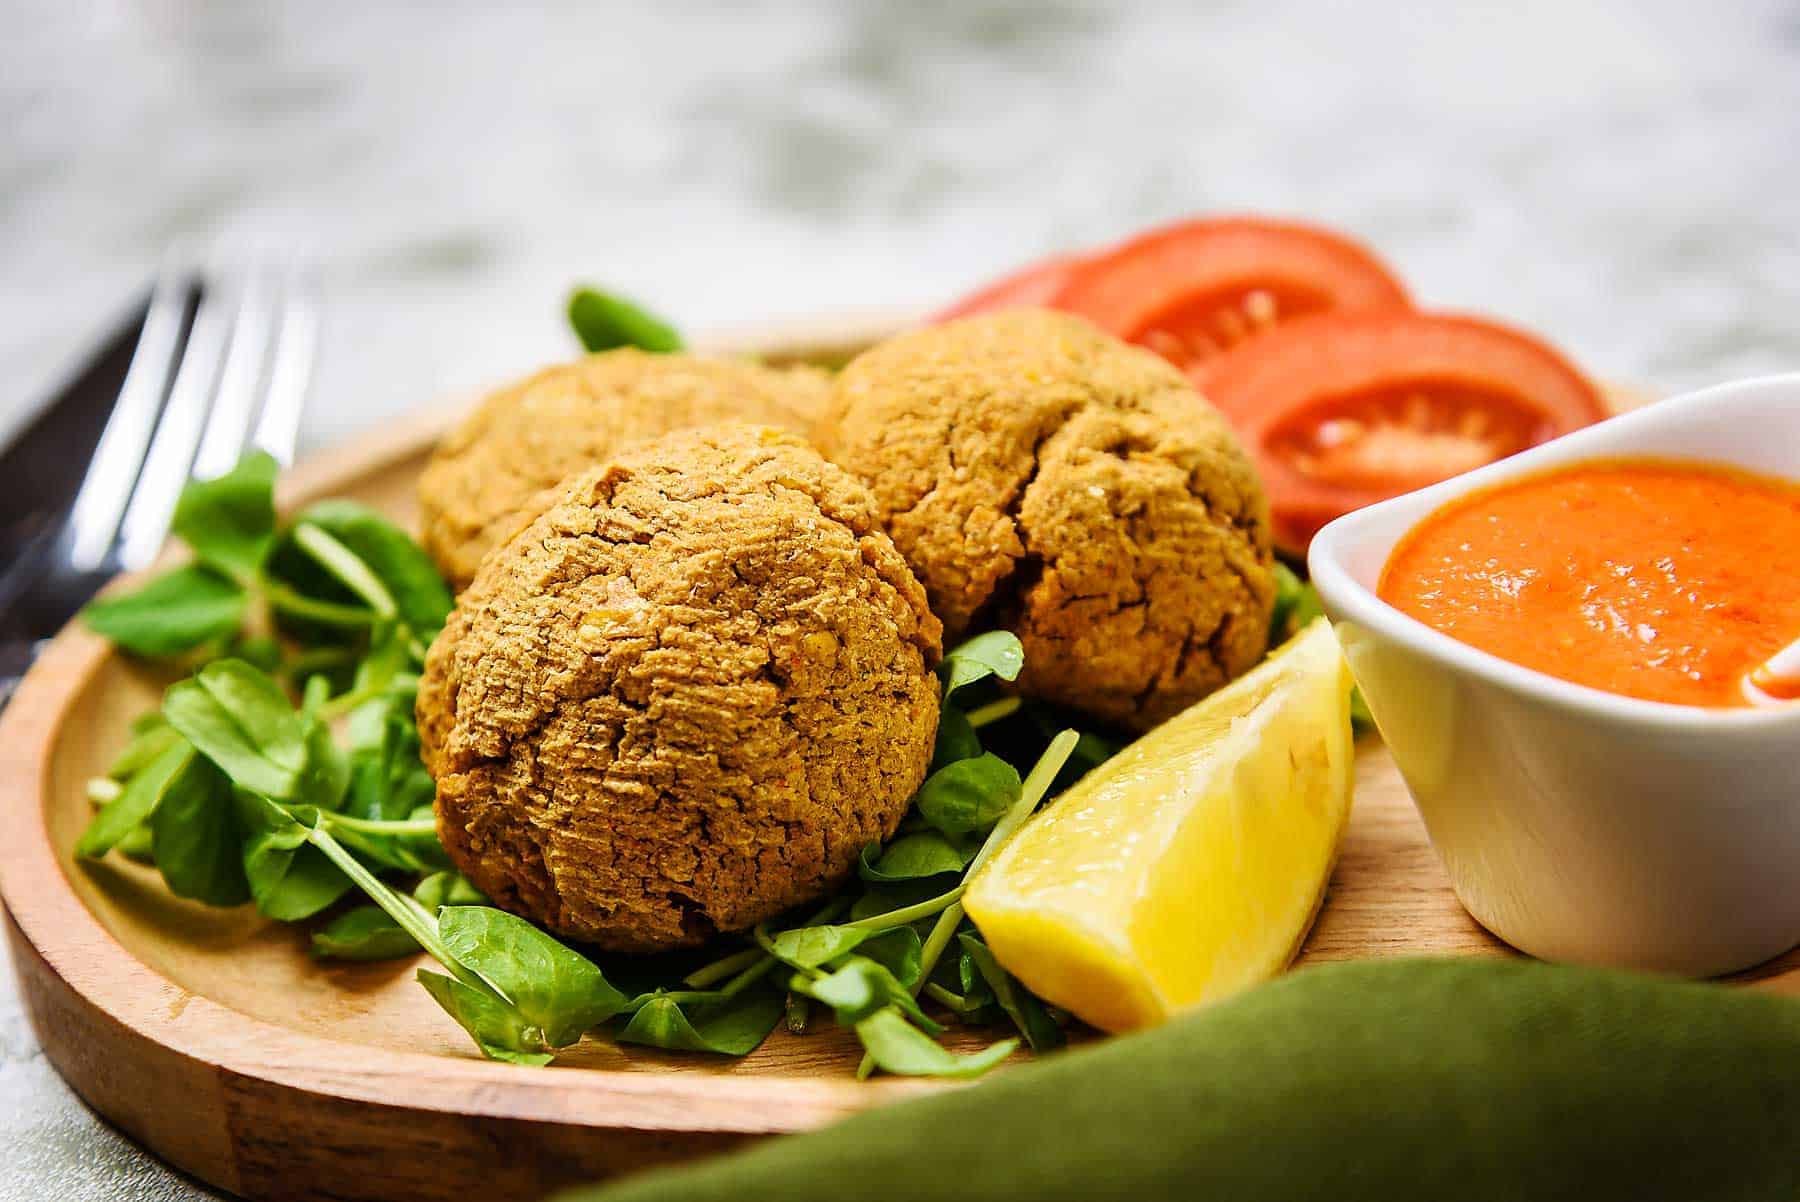 Cooked Vegan Chickpea & Sweetcorn Falafel on a plate